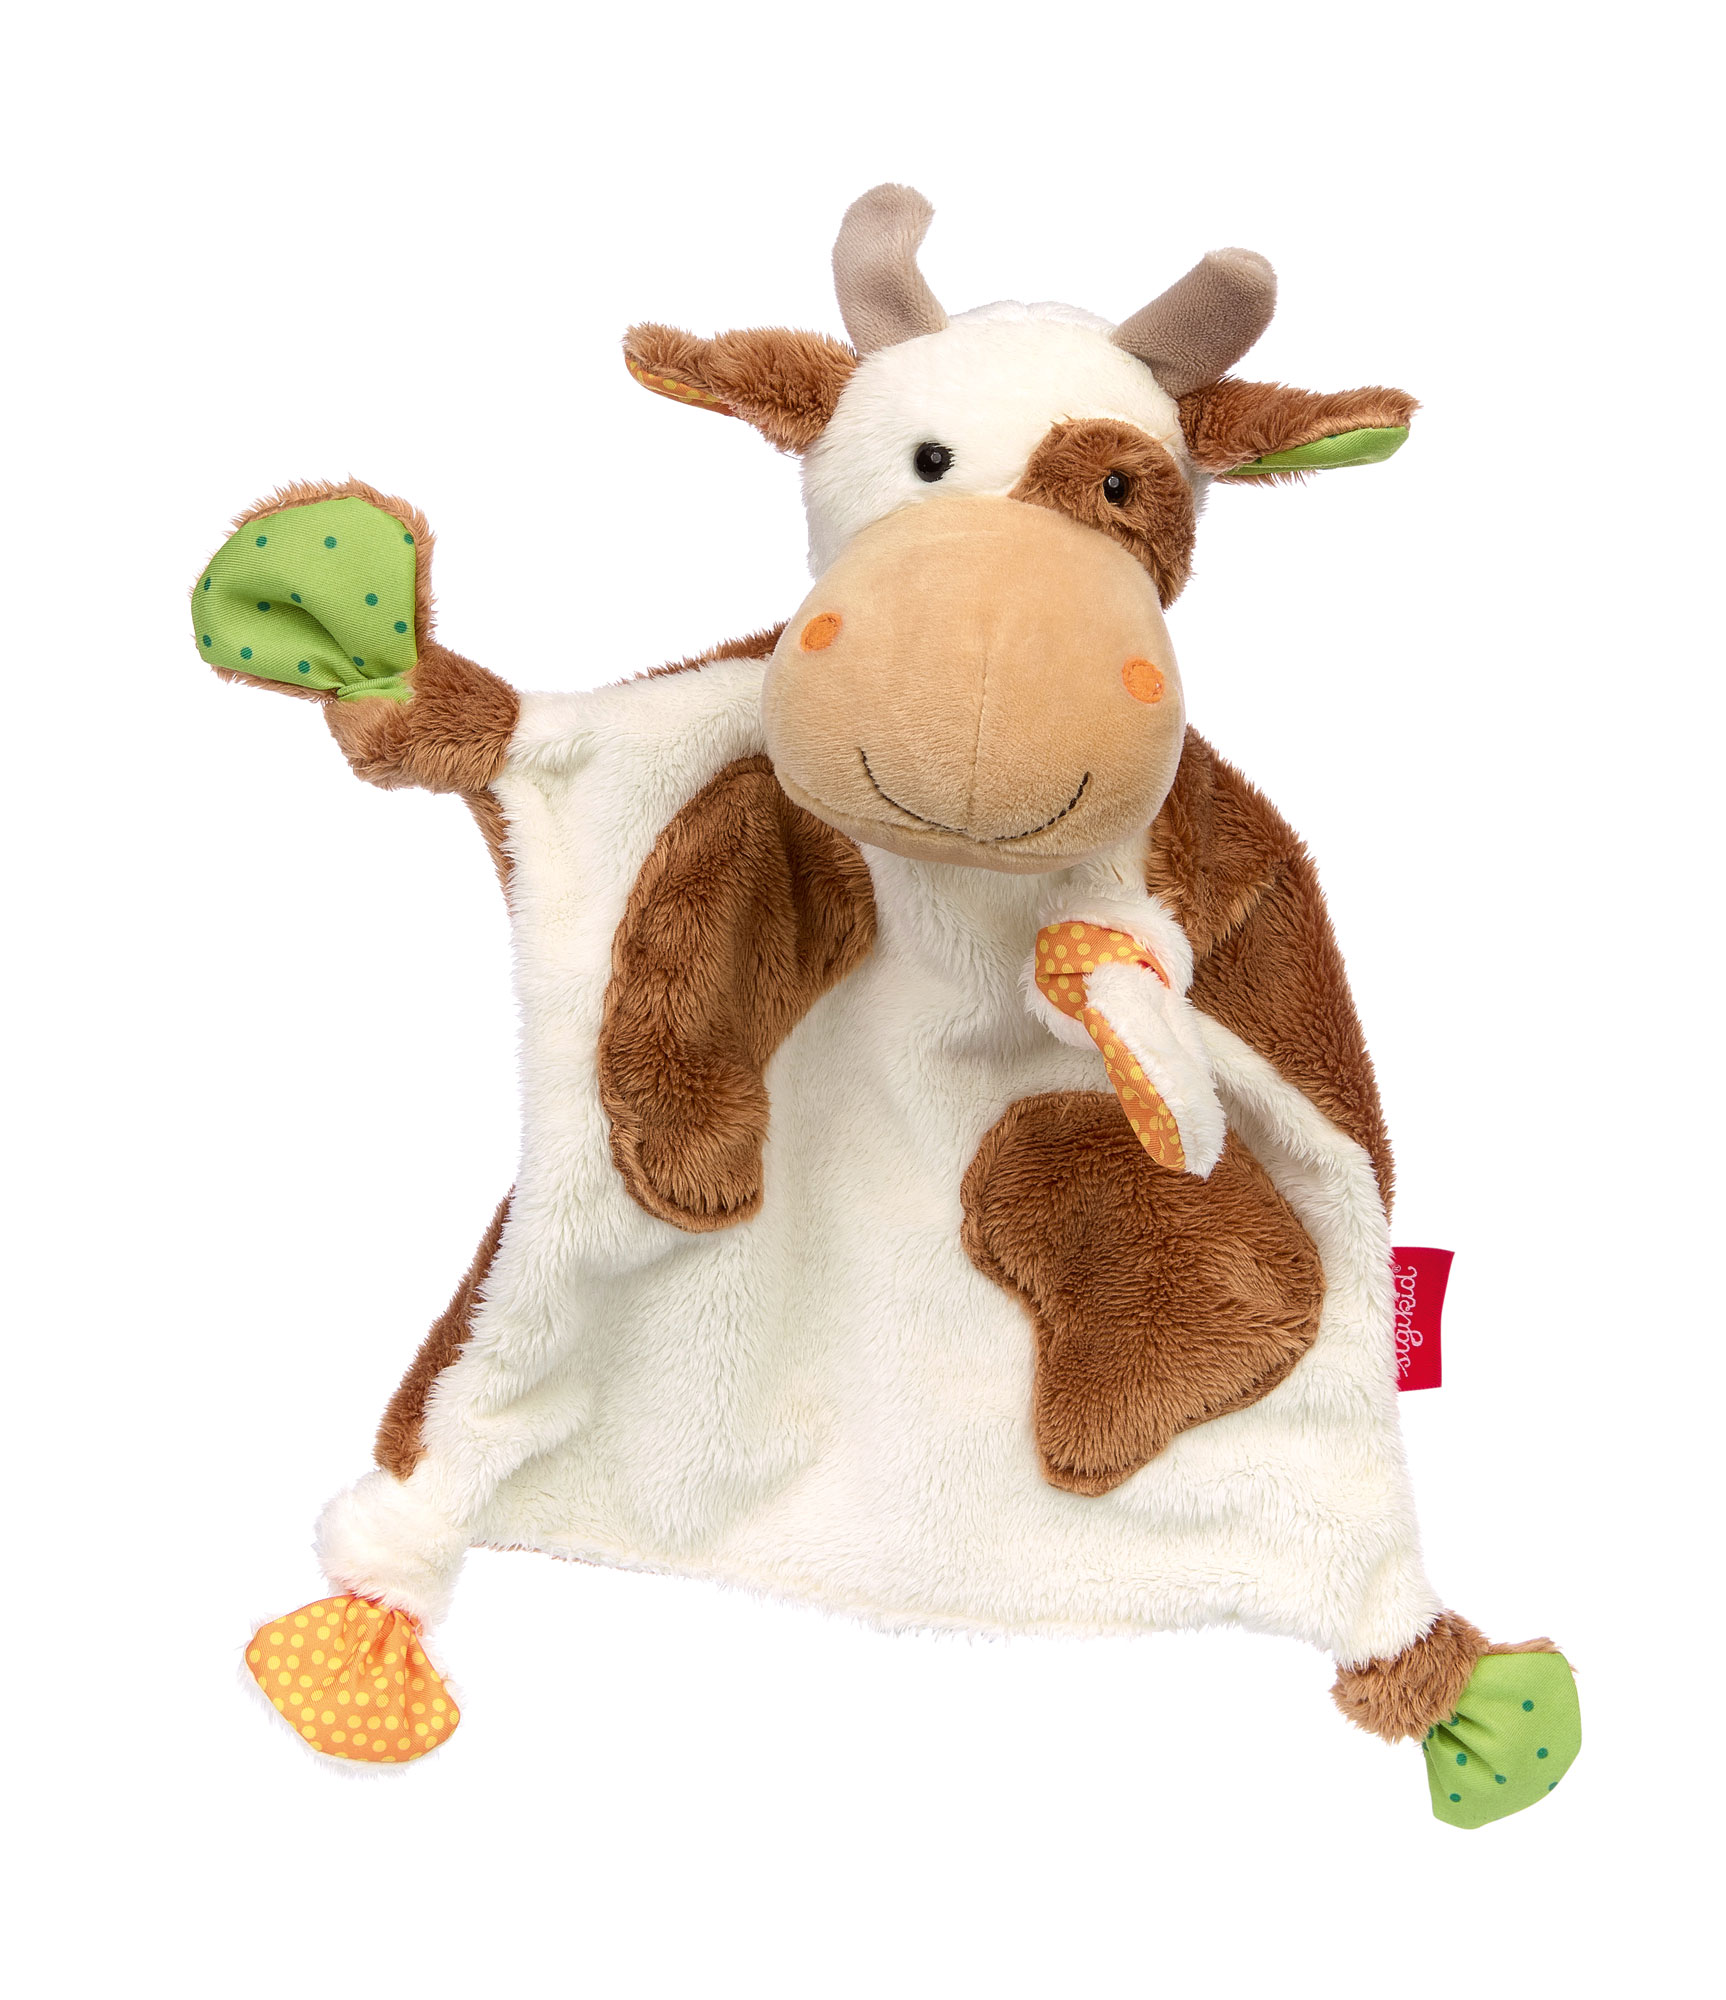 Plush comforter cow, Characters